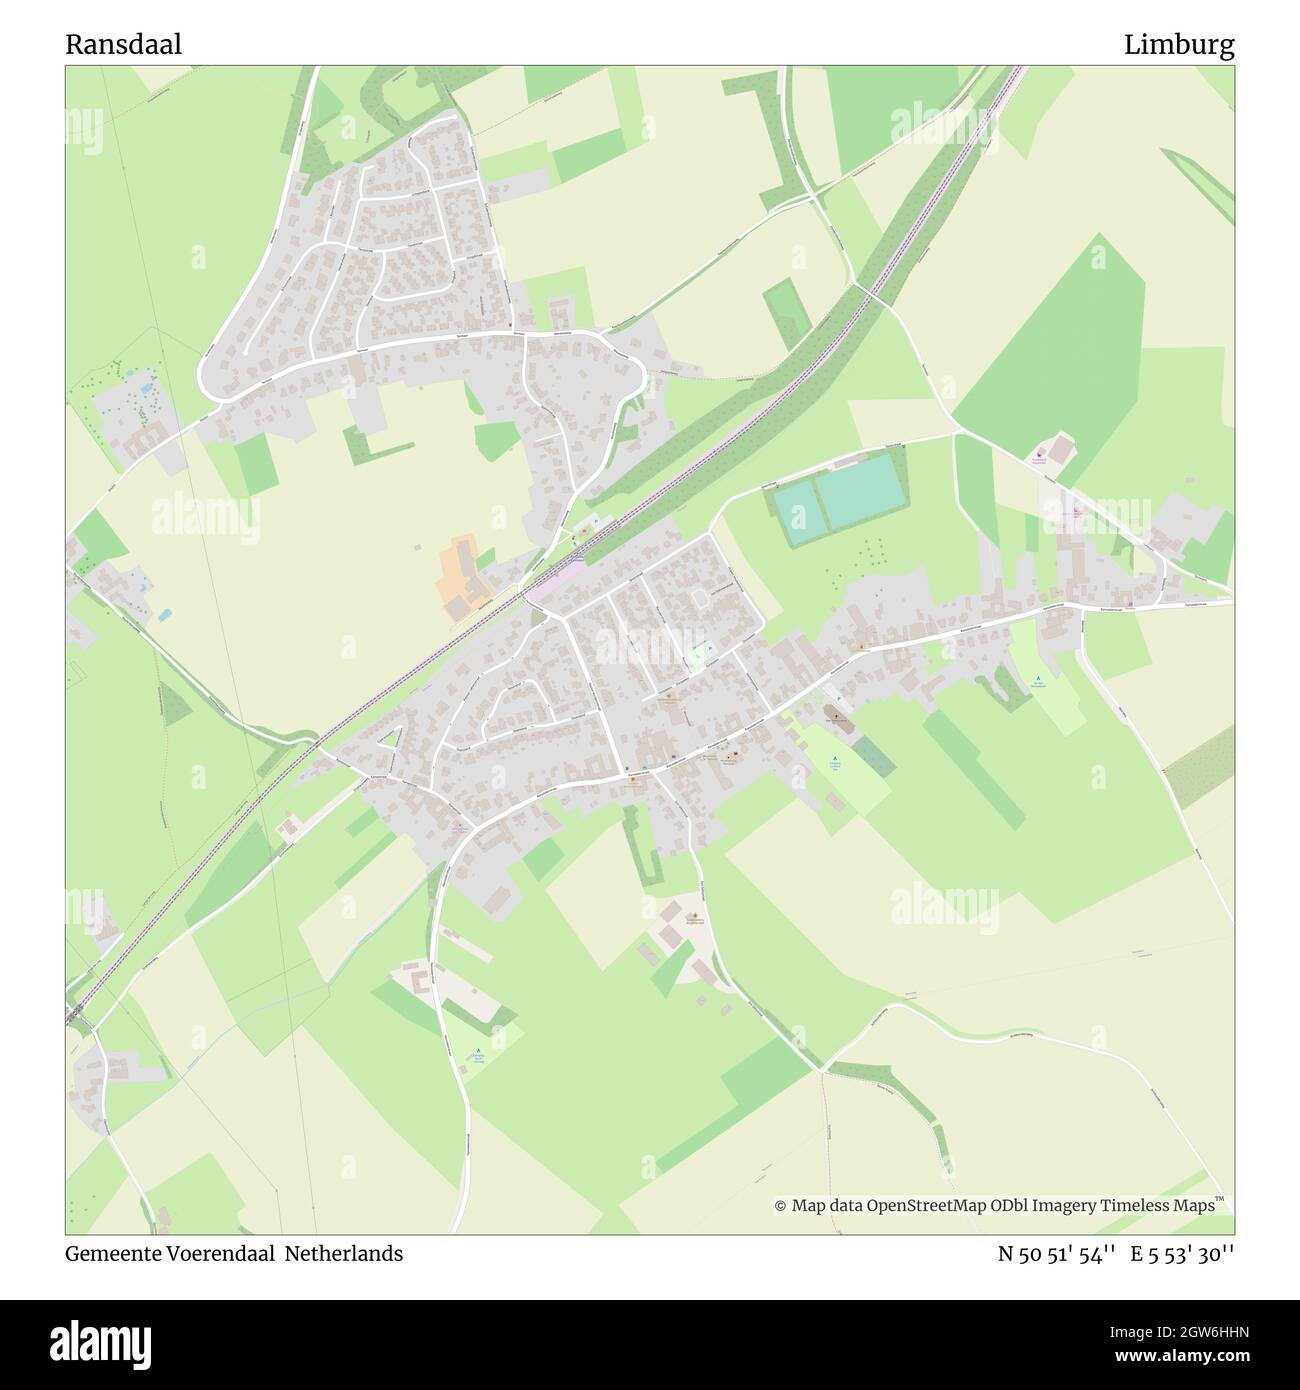 Ransdaal, Gemeente Voerendaal, Netherlands, Limburg, N 50 51' 54'', E 5 53' 30'', map, Timeless Map published in 2021. Travelers, explorers and adventurers like Florence Nightingale, David Livingstone, Ernest Shackleton, Lewis and Clark and Sherlock Holmes relied on maps to plan travels to the world's most remote corners, Timeless Maps is mapping most locations on the globe, showing the achievement of great dreams Stock Photo